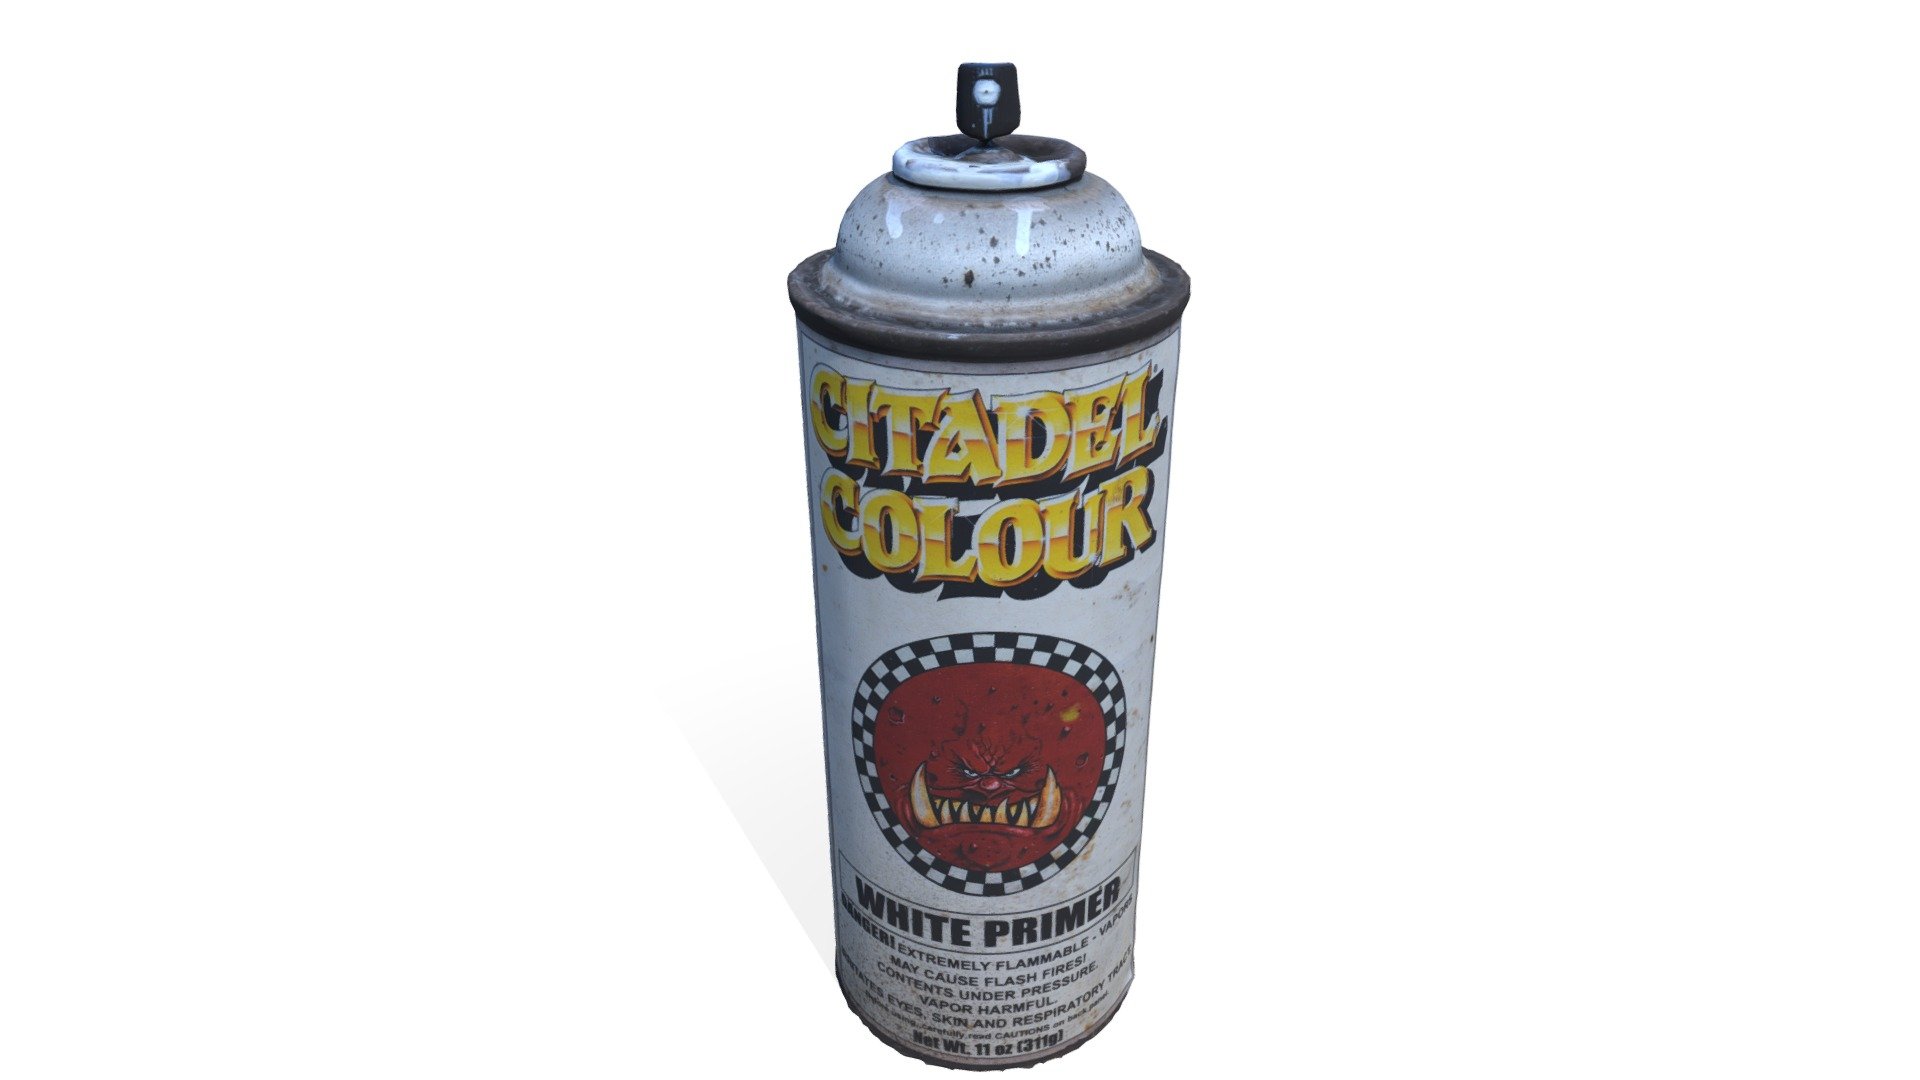 Citadel Colour Spray Paint Can Scan